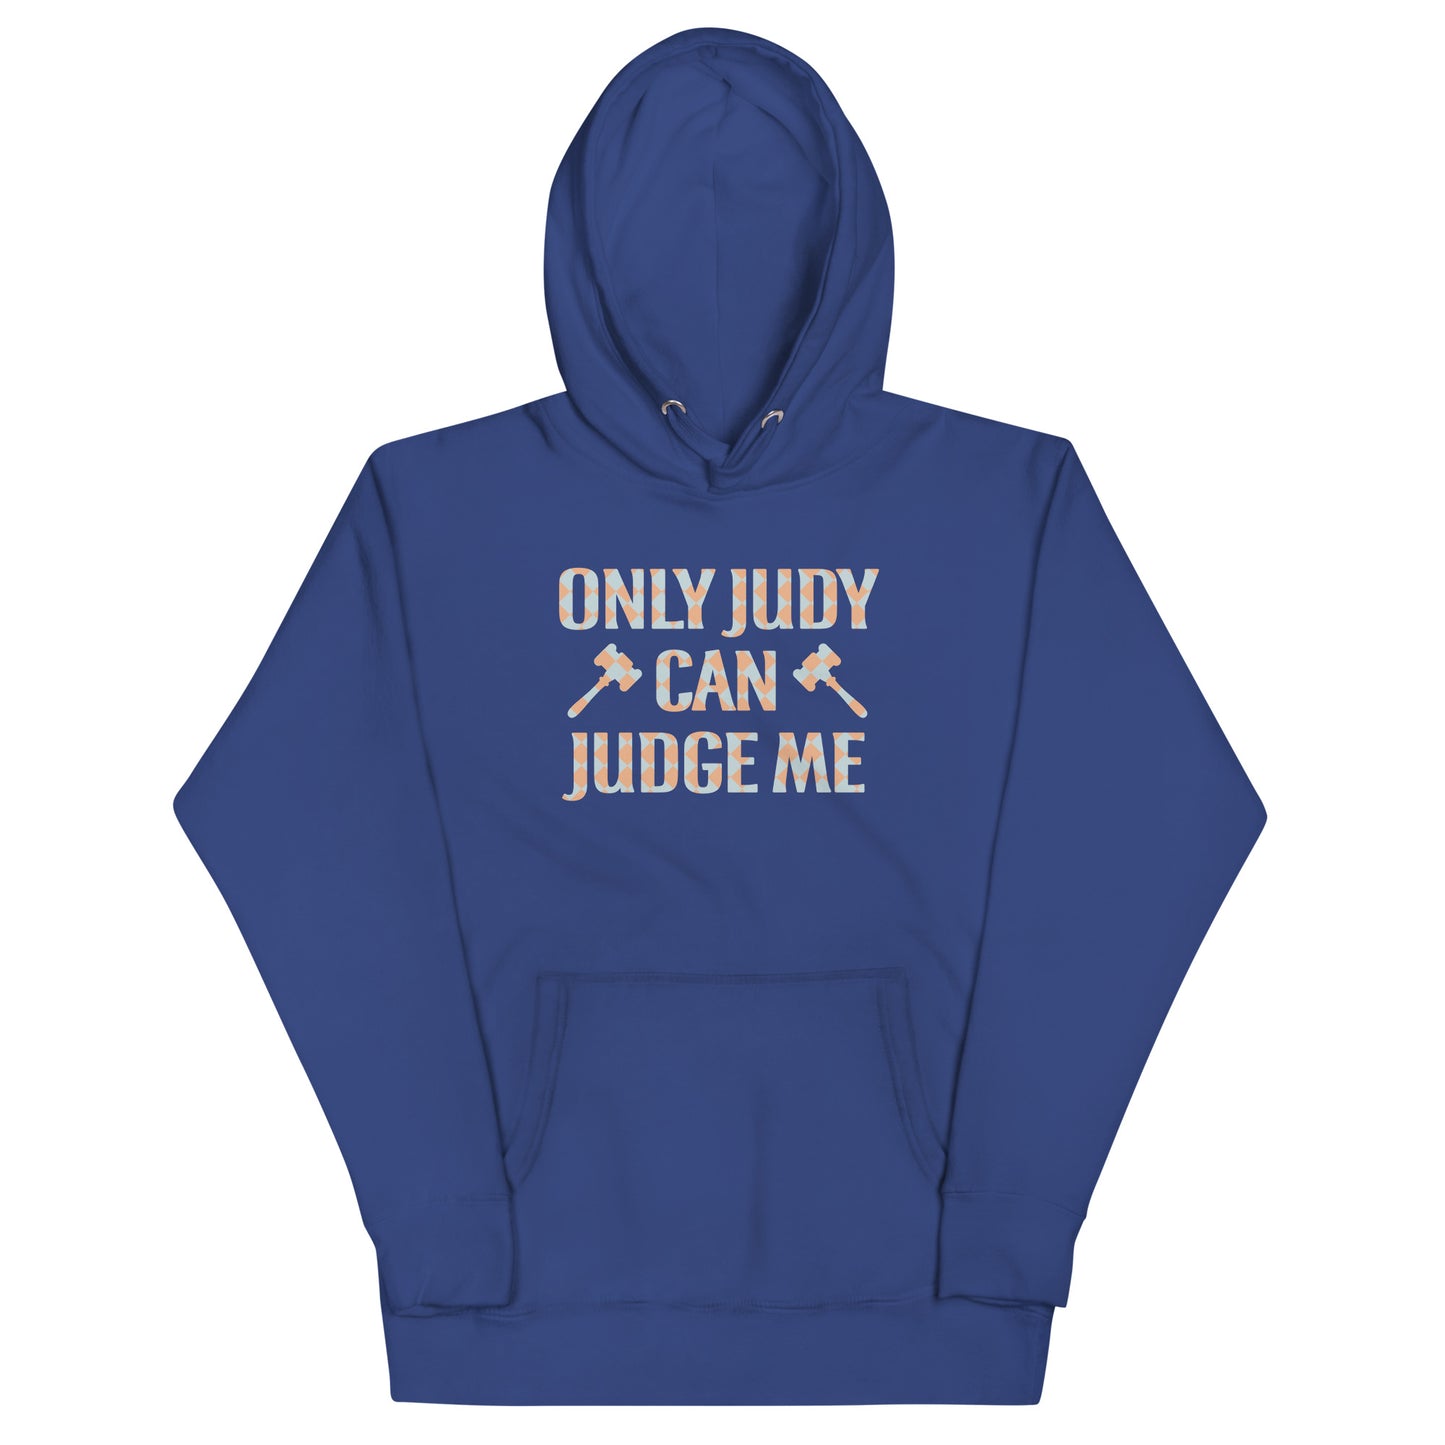 Only Judy Can Judge Me Unisex Hoodie